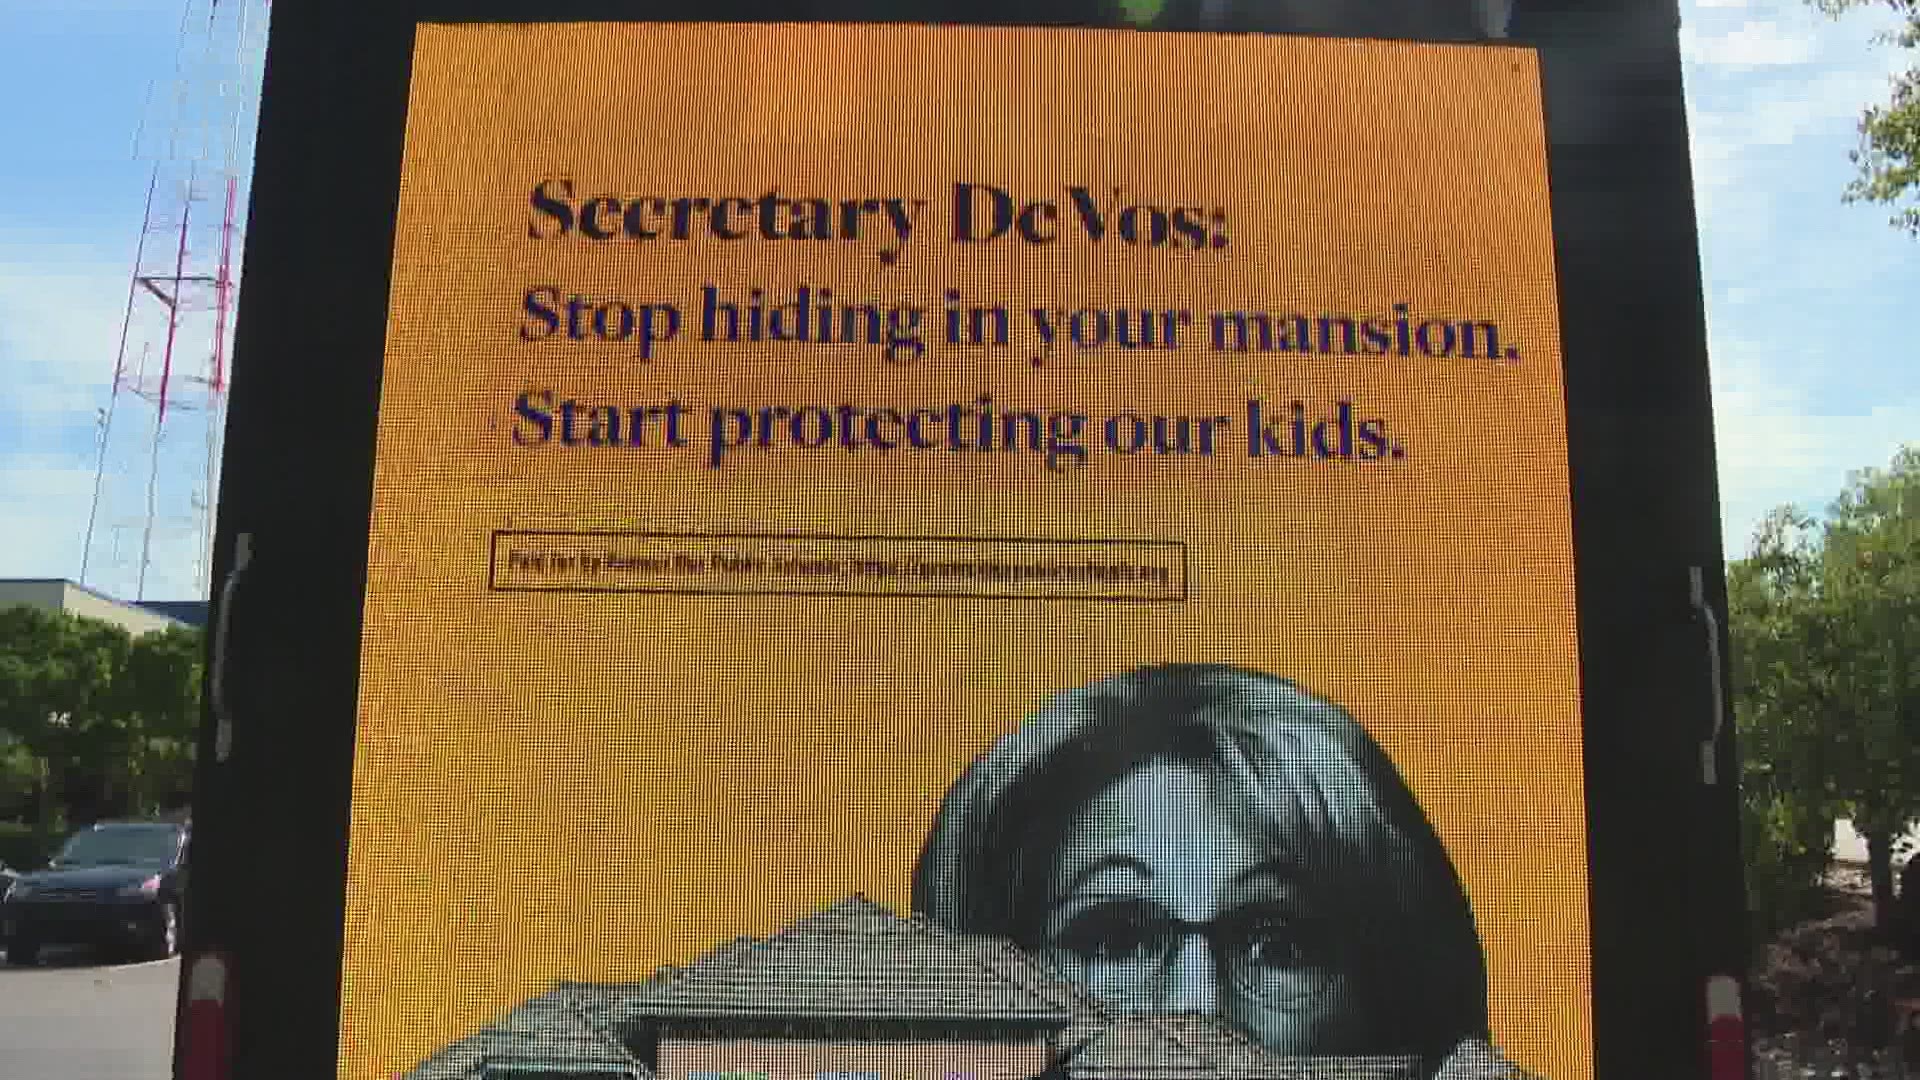 Mobile billboard criticizes DeVos' handling of the COVID-19 crisis, says she's 'gambling with kids' lives'